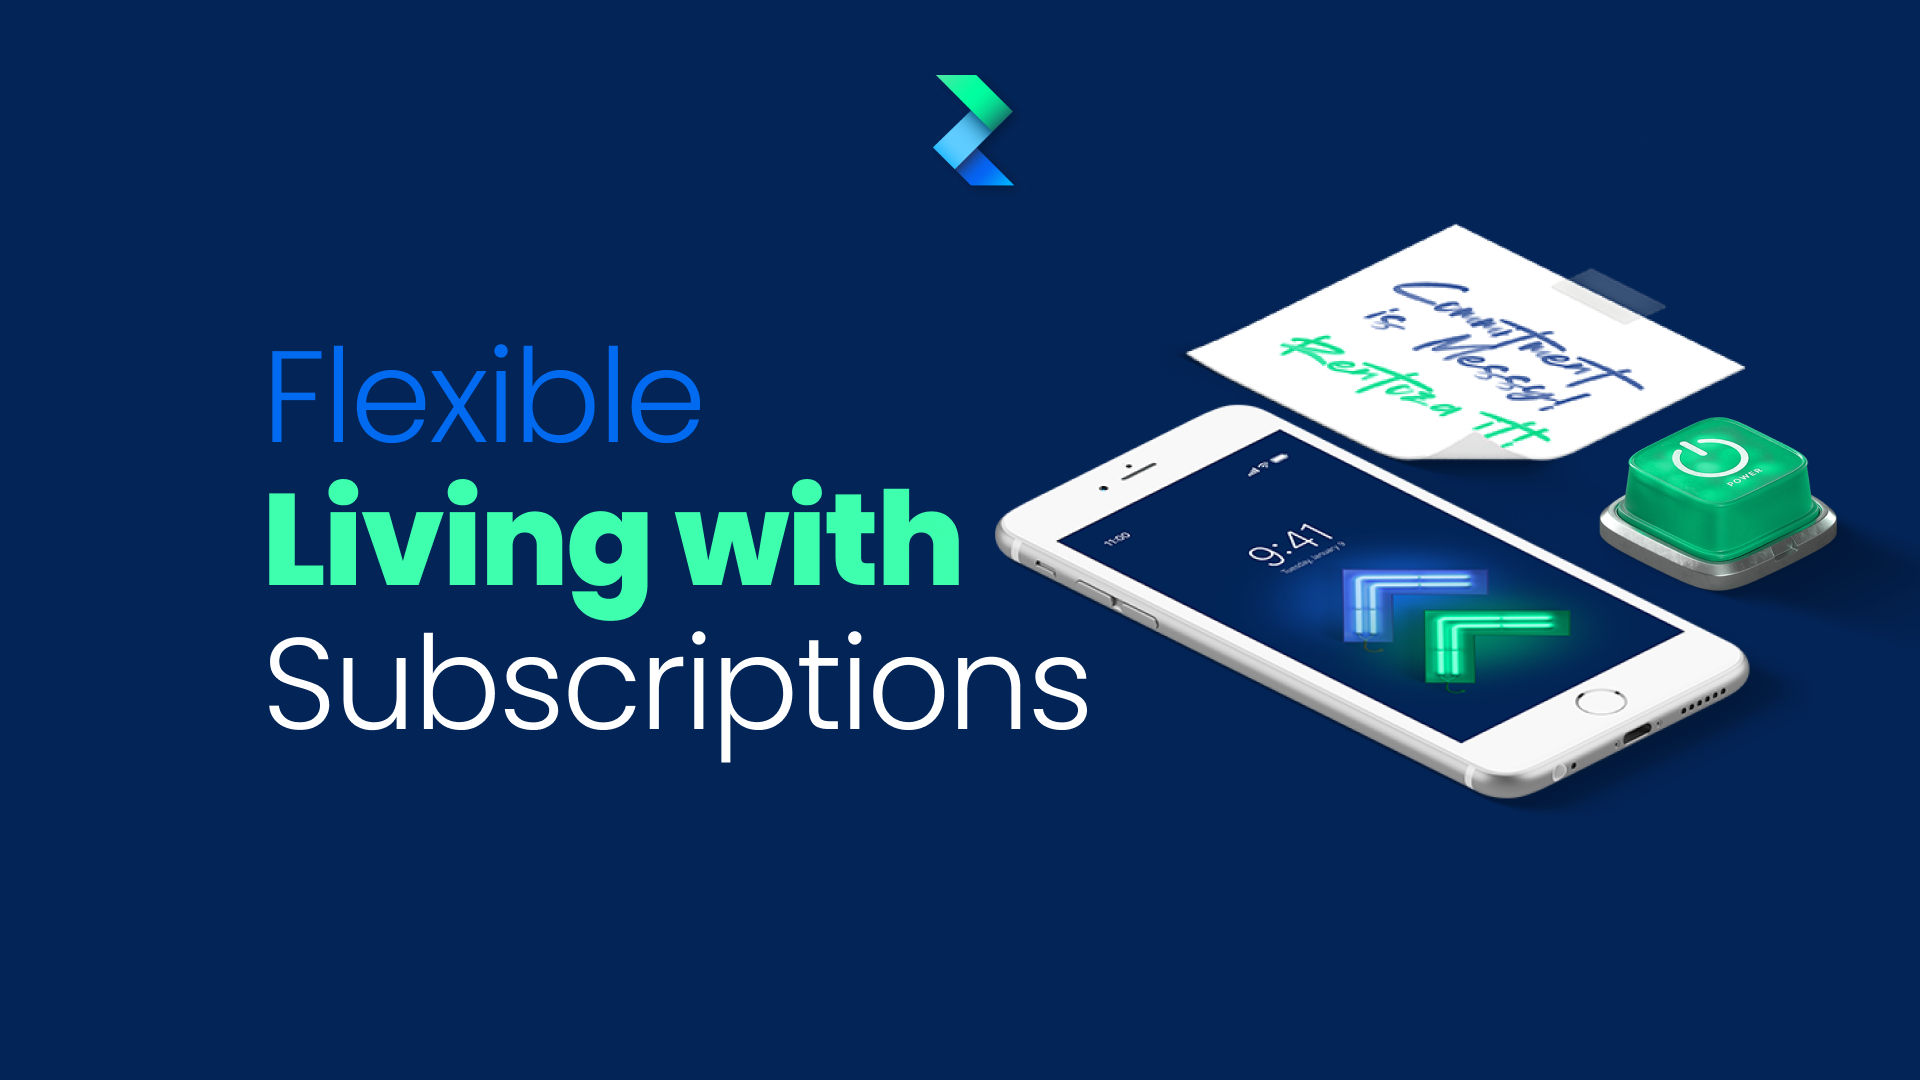 Flexible Living with Subscriptions